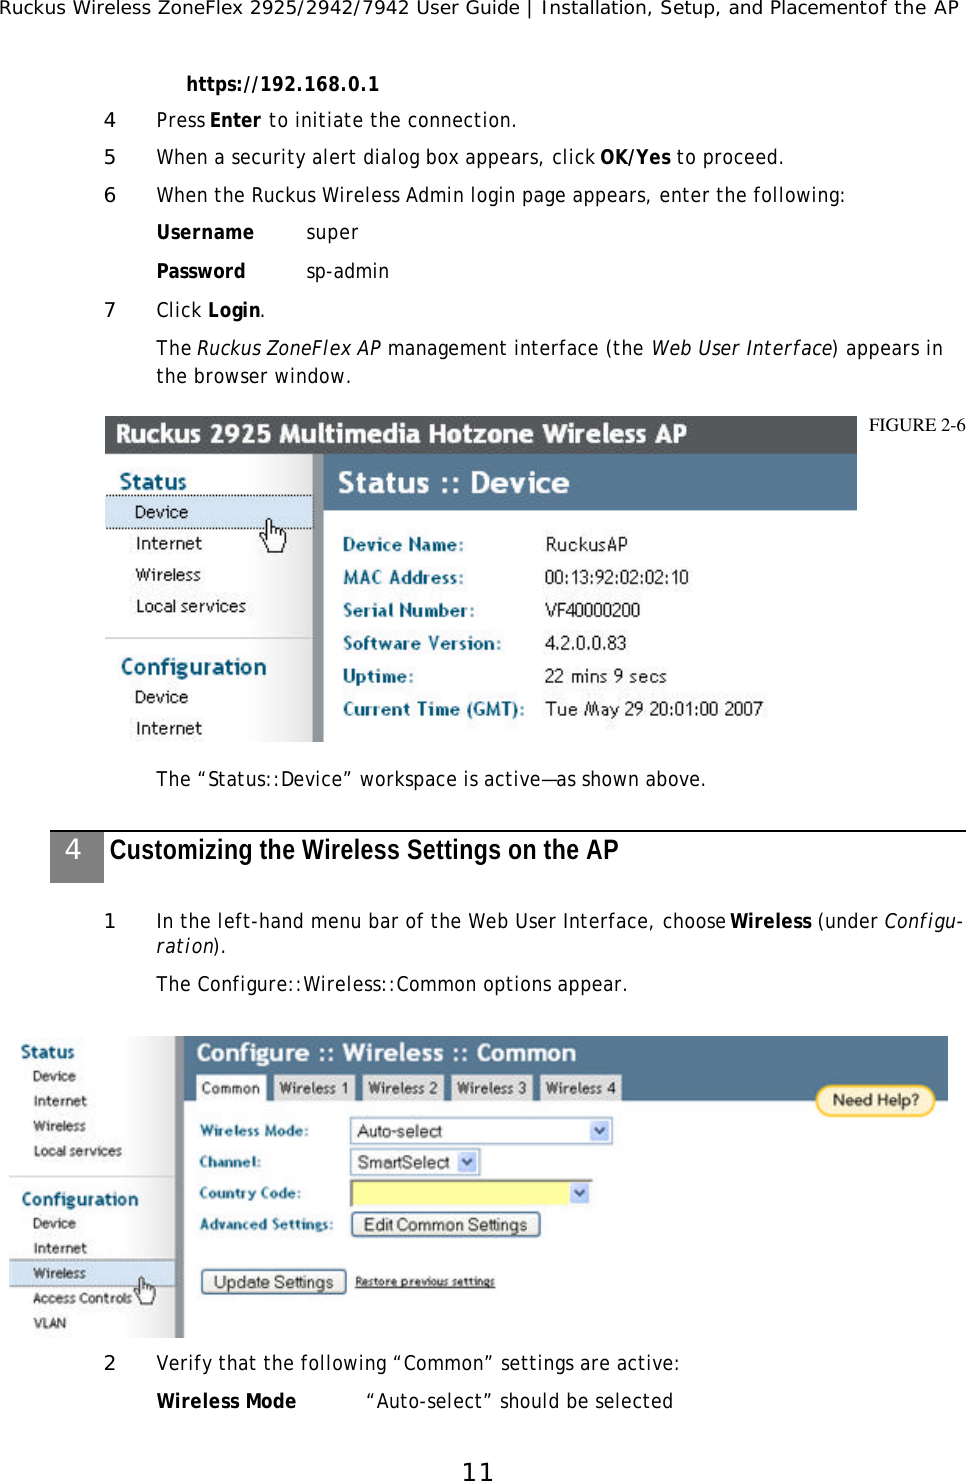 Ruckus Wireless ZoneFlex 2925/2942/7942 User Guide | Installation, Setup, and Placementof the AP11https://192.168.0.14Press Enter to initiate the connection.5When a security alert dialog box appears, click OK/Yes to proceed.6When the Ruckus Wireless Admin login page appears, enter the following:Username superPassword sp-admin7Click Login.The Ruckus ZoneFlex AP management interface (the Web User Interface) appears in the browser window. The “Status::Device” workspace is active—as shown above. 1In the left-hand menu bar of the Web User Interface, choose Wireless (under Configu-ration). The Configure::Wireless::Common options appear.2Verify that the following “Common” settings are active:Wireless Mode “Auto-select” should be selectedFIGURE 2-64Customizing the Wireless Settings on the AP